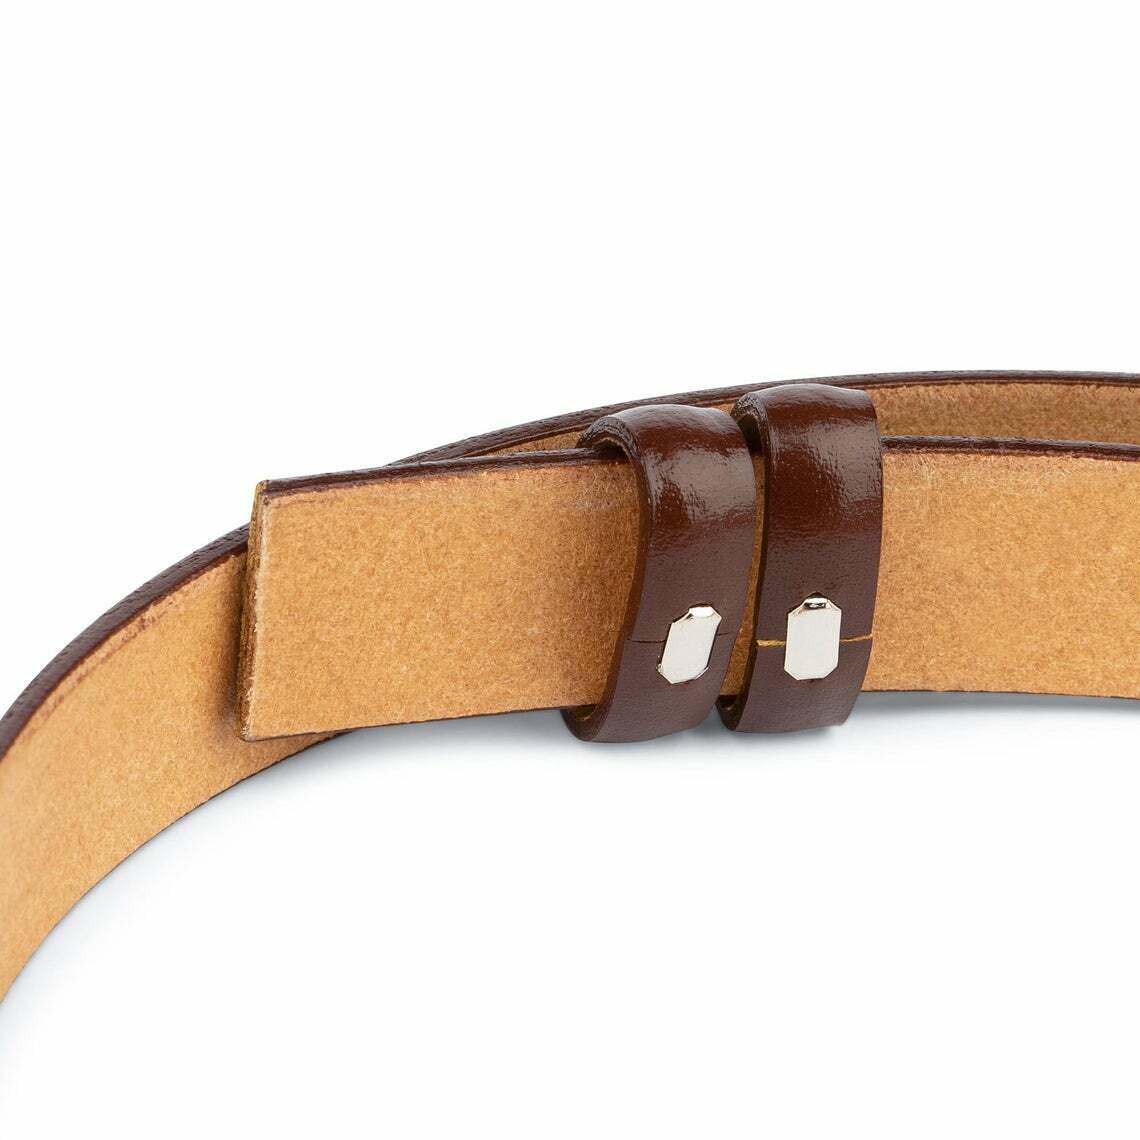 Buy Thin Leather Belt 1 inch